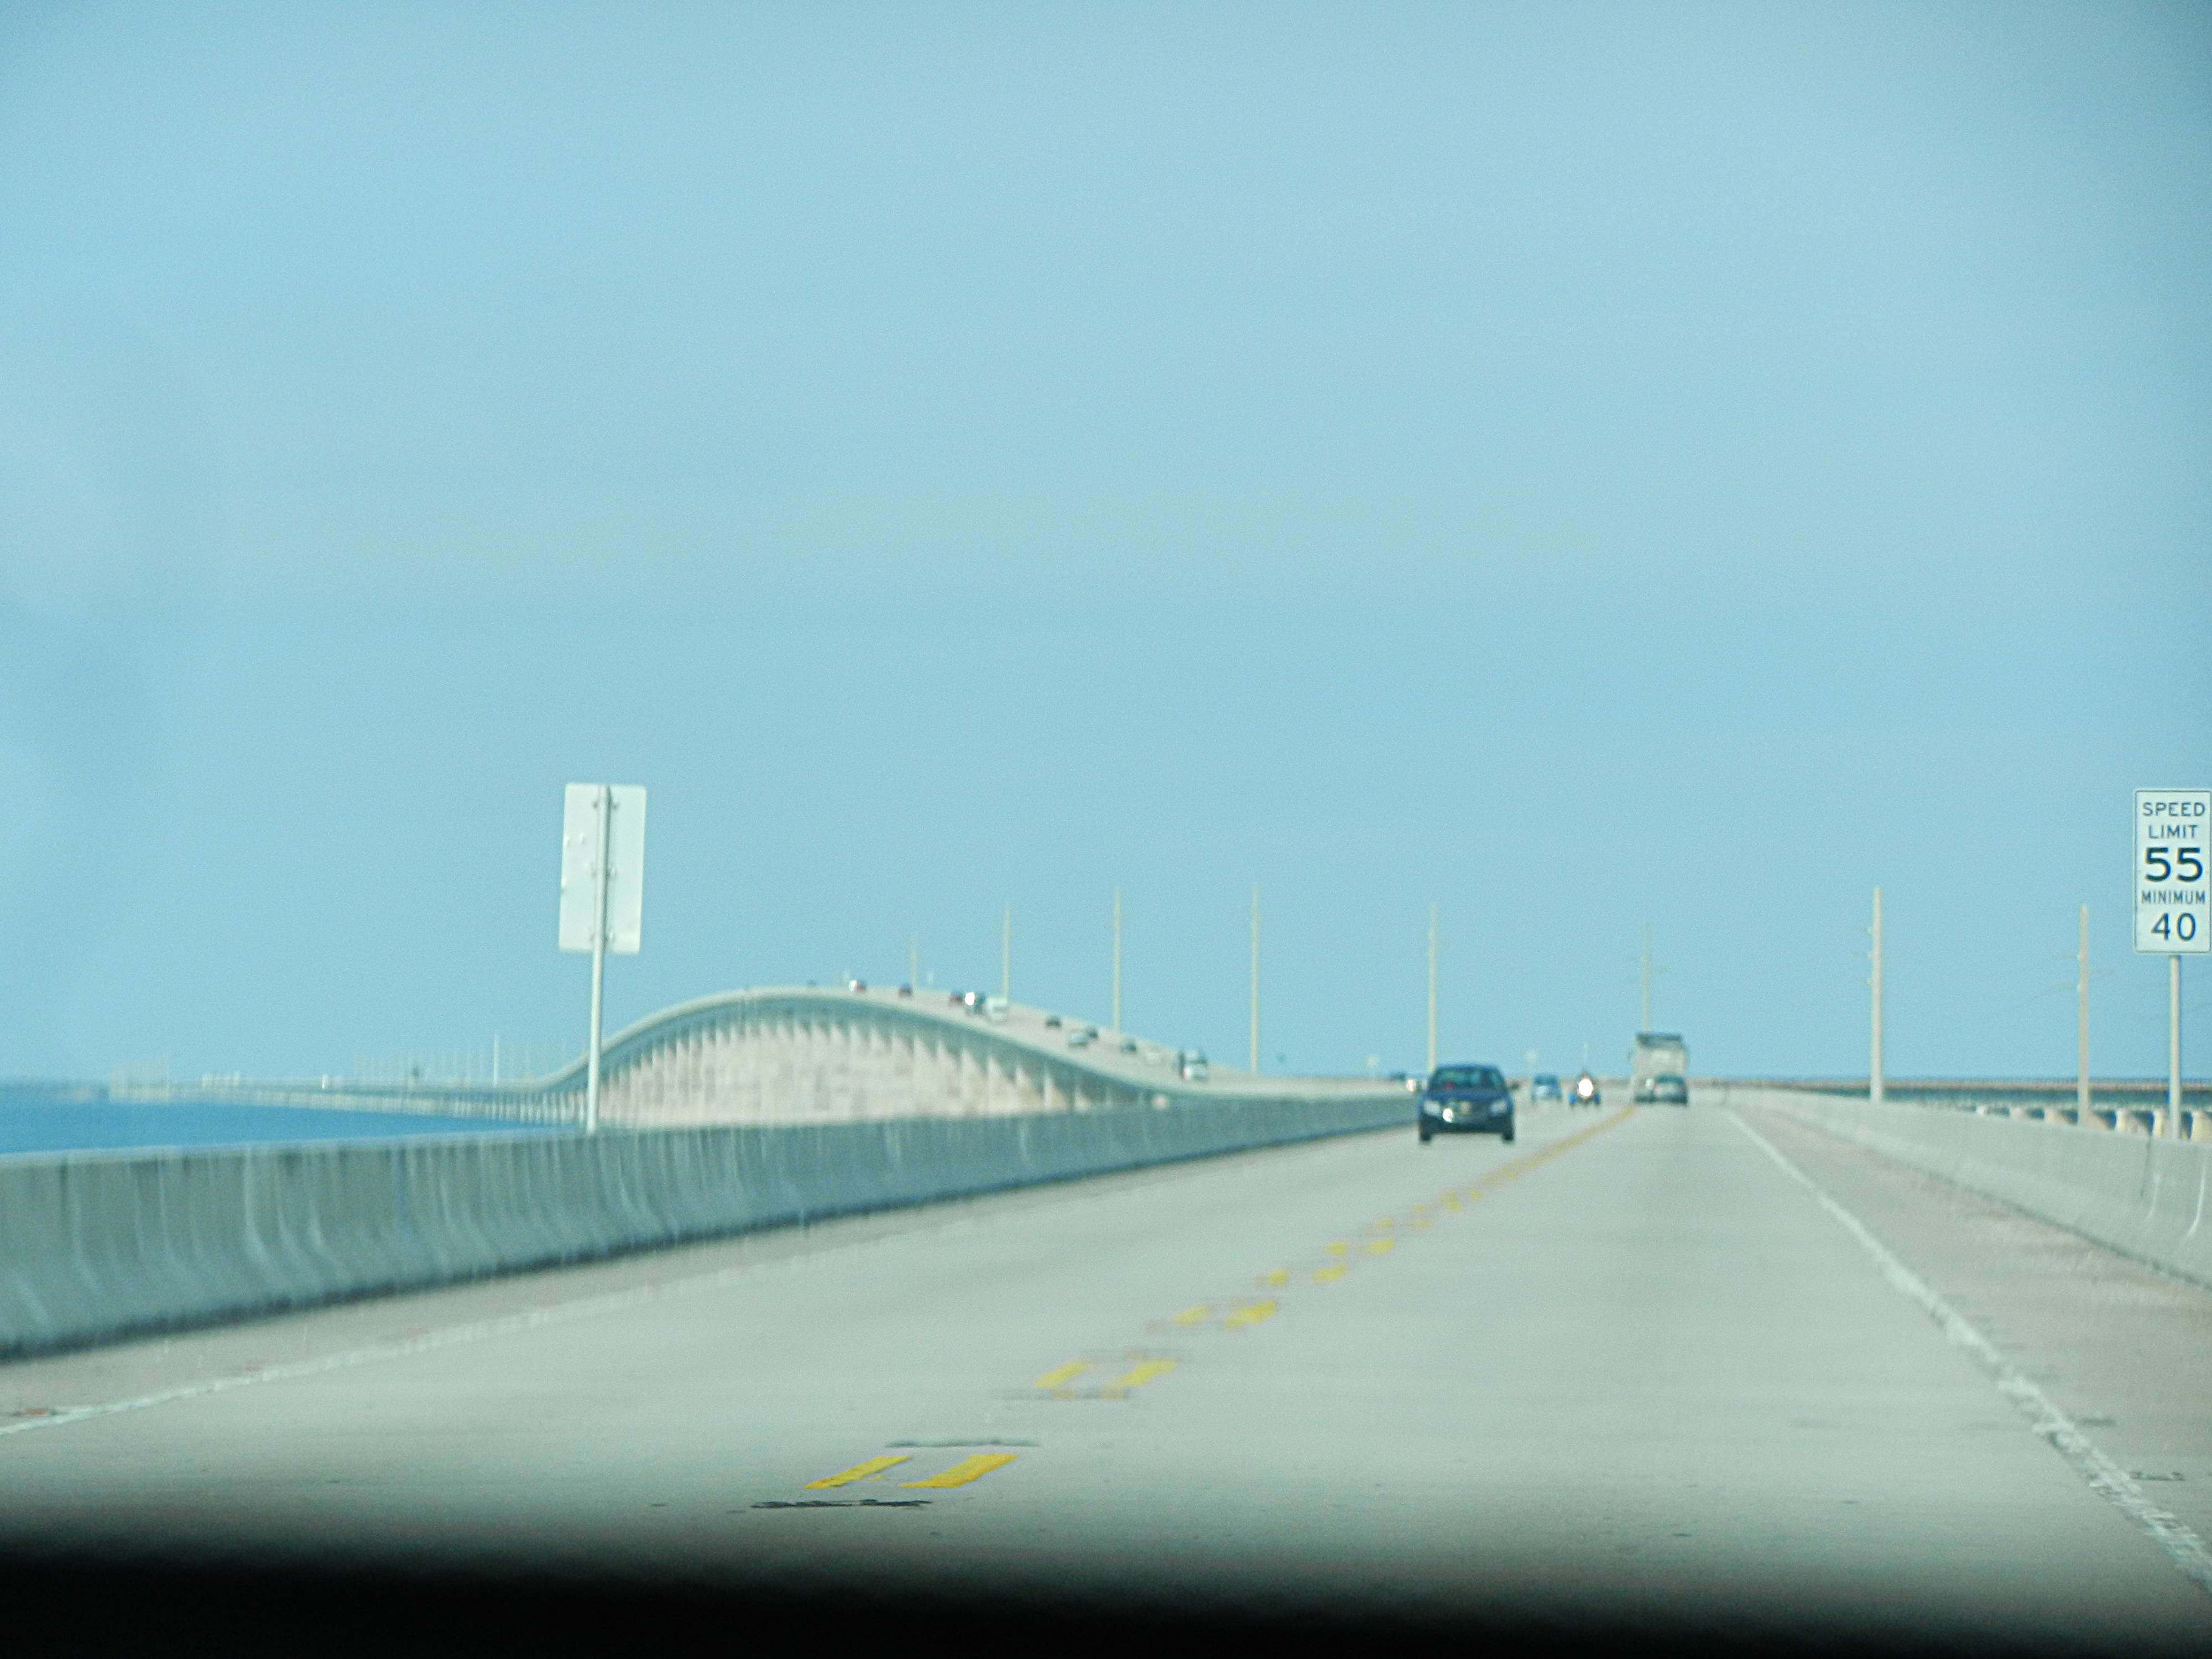 Photo looking out through the windshield of a car at a bridge that is 7 miles long and curves around to the left.